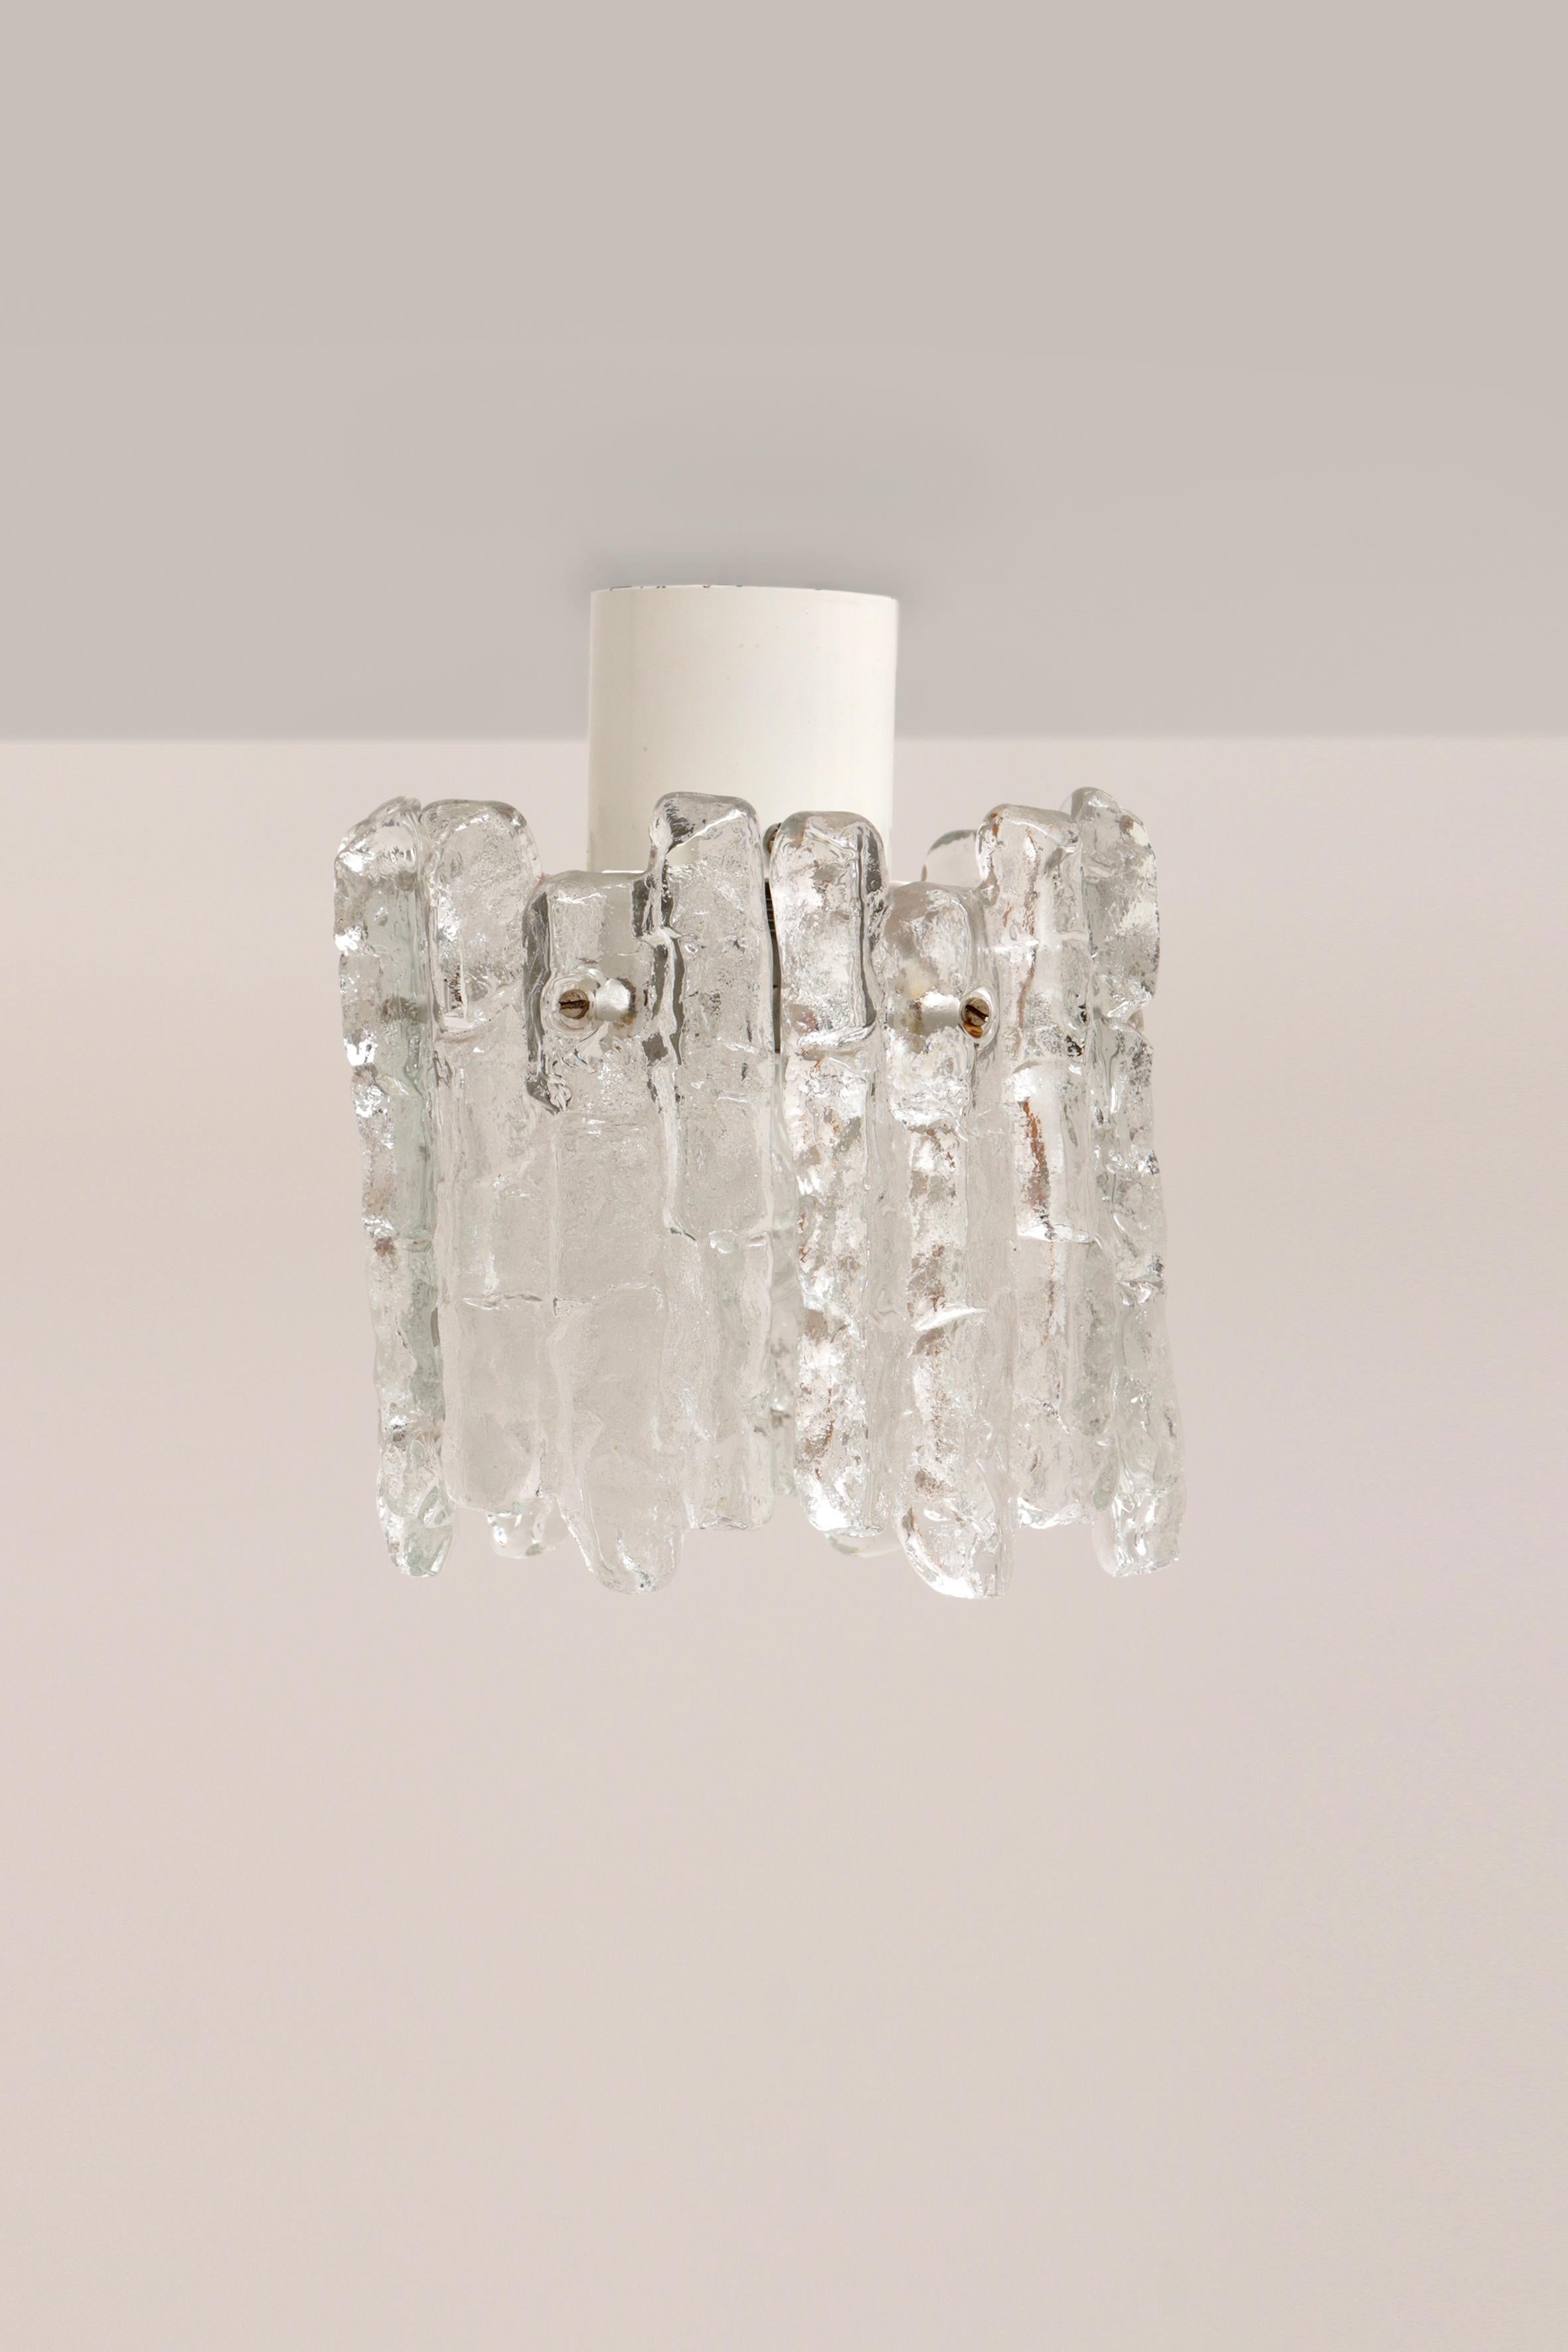 A beautiful hanging lamp from Kalmar by Franken KG.

This is a beautiful model hanging lamp. The special shapes in the design give these lamps a completely individual and unique look. The lamp has 6 murano glass sheets.

This lamp was made in